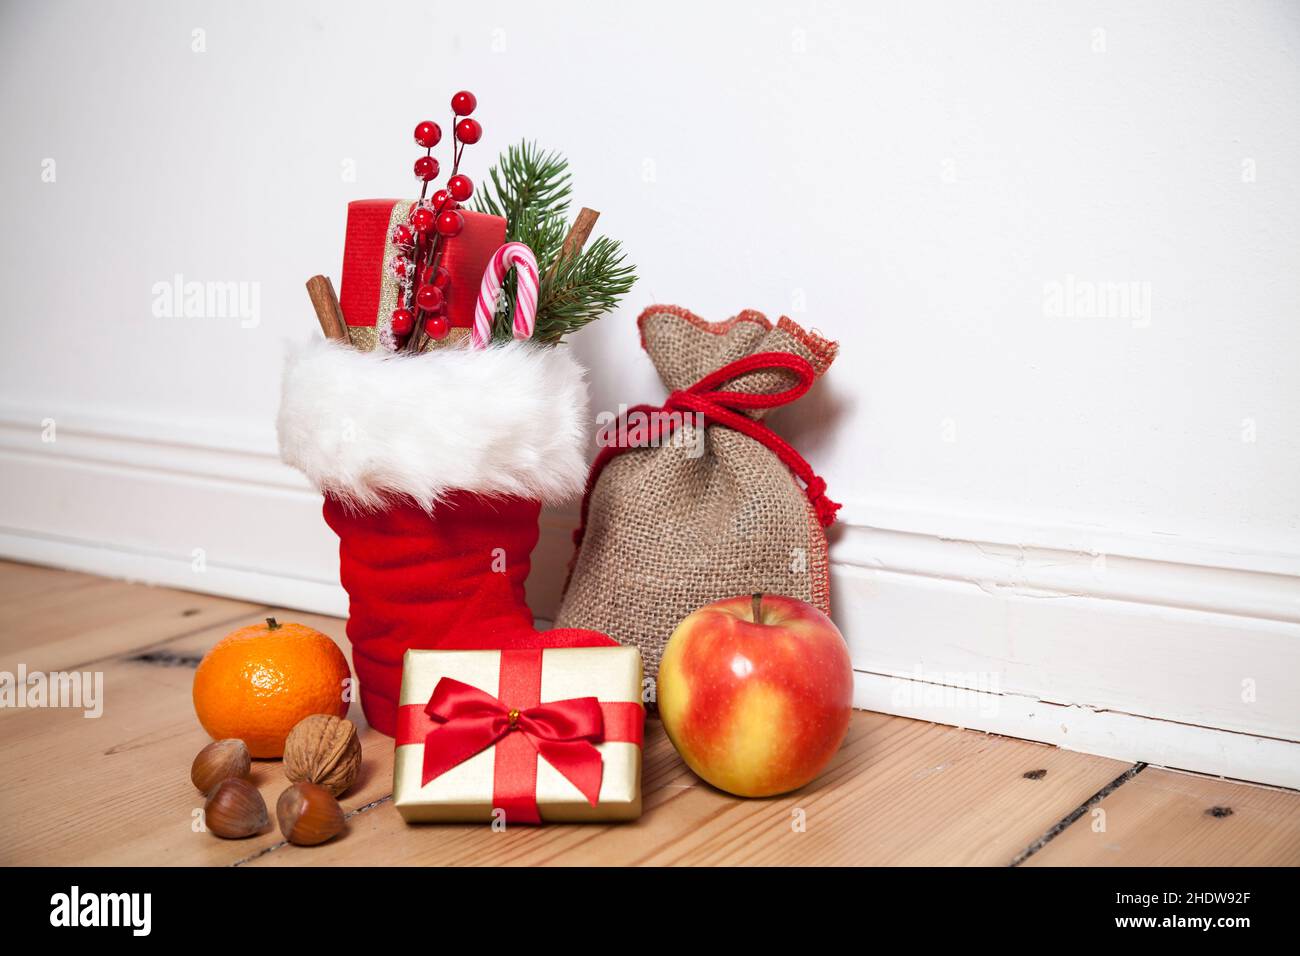 tradition, nicholas boots, december 6, traditions Stock Photo